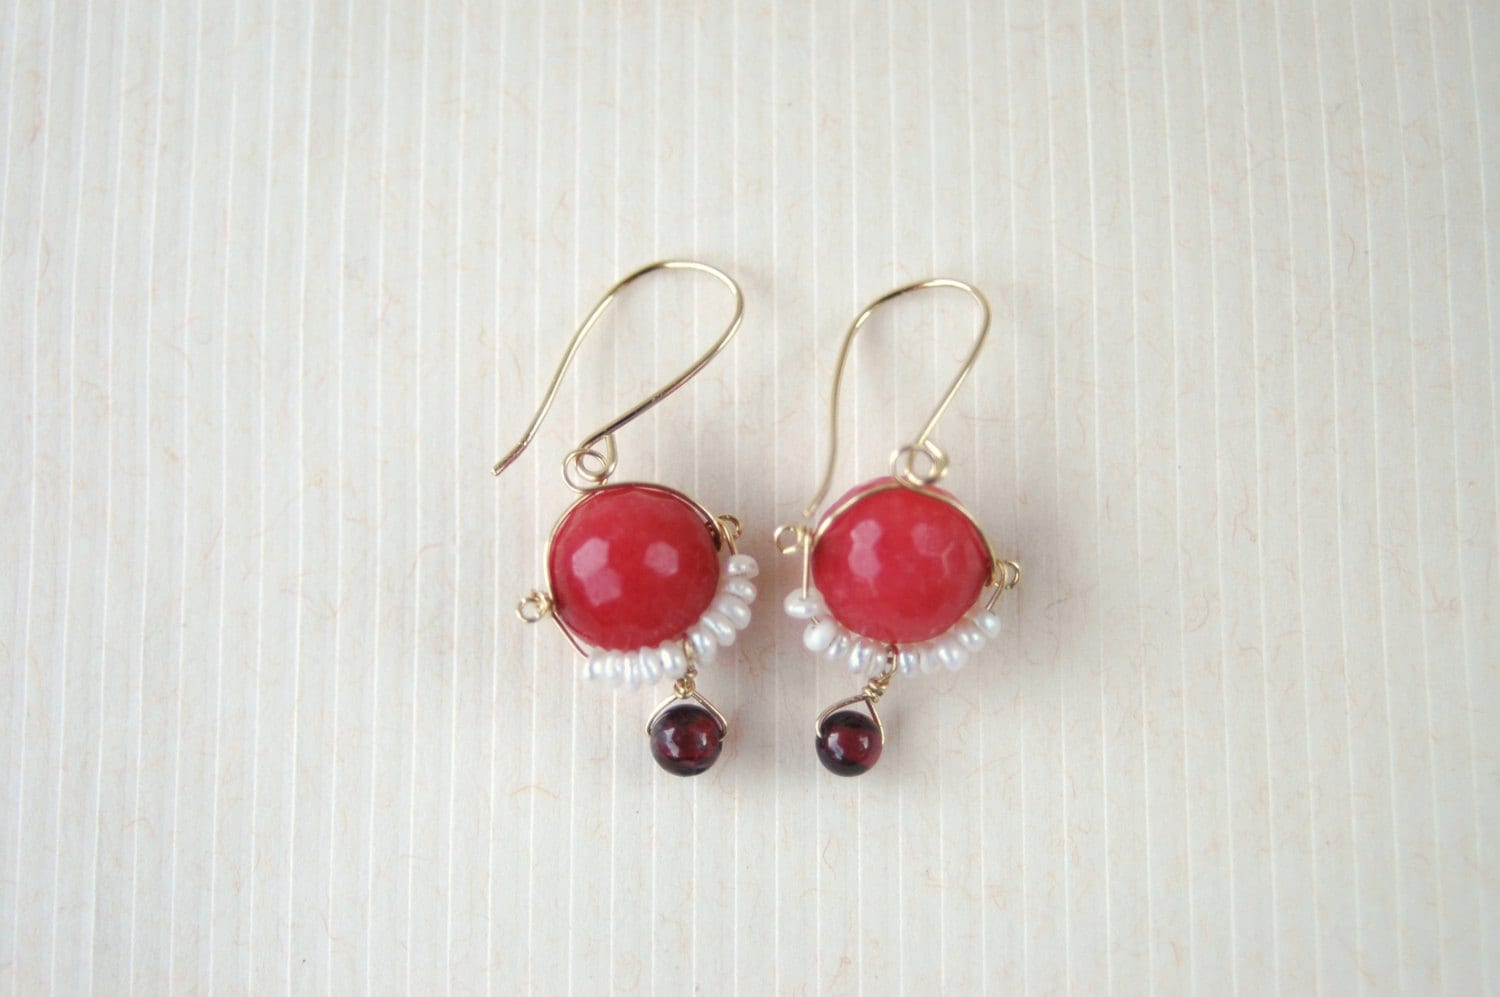 Coral Pink Earrings with Pearl and Garnet in Silver or Gold